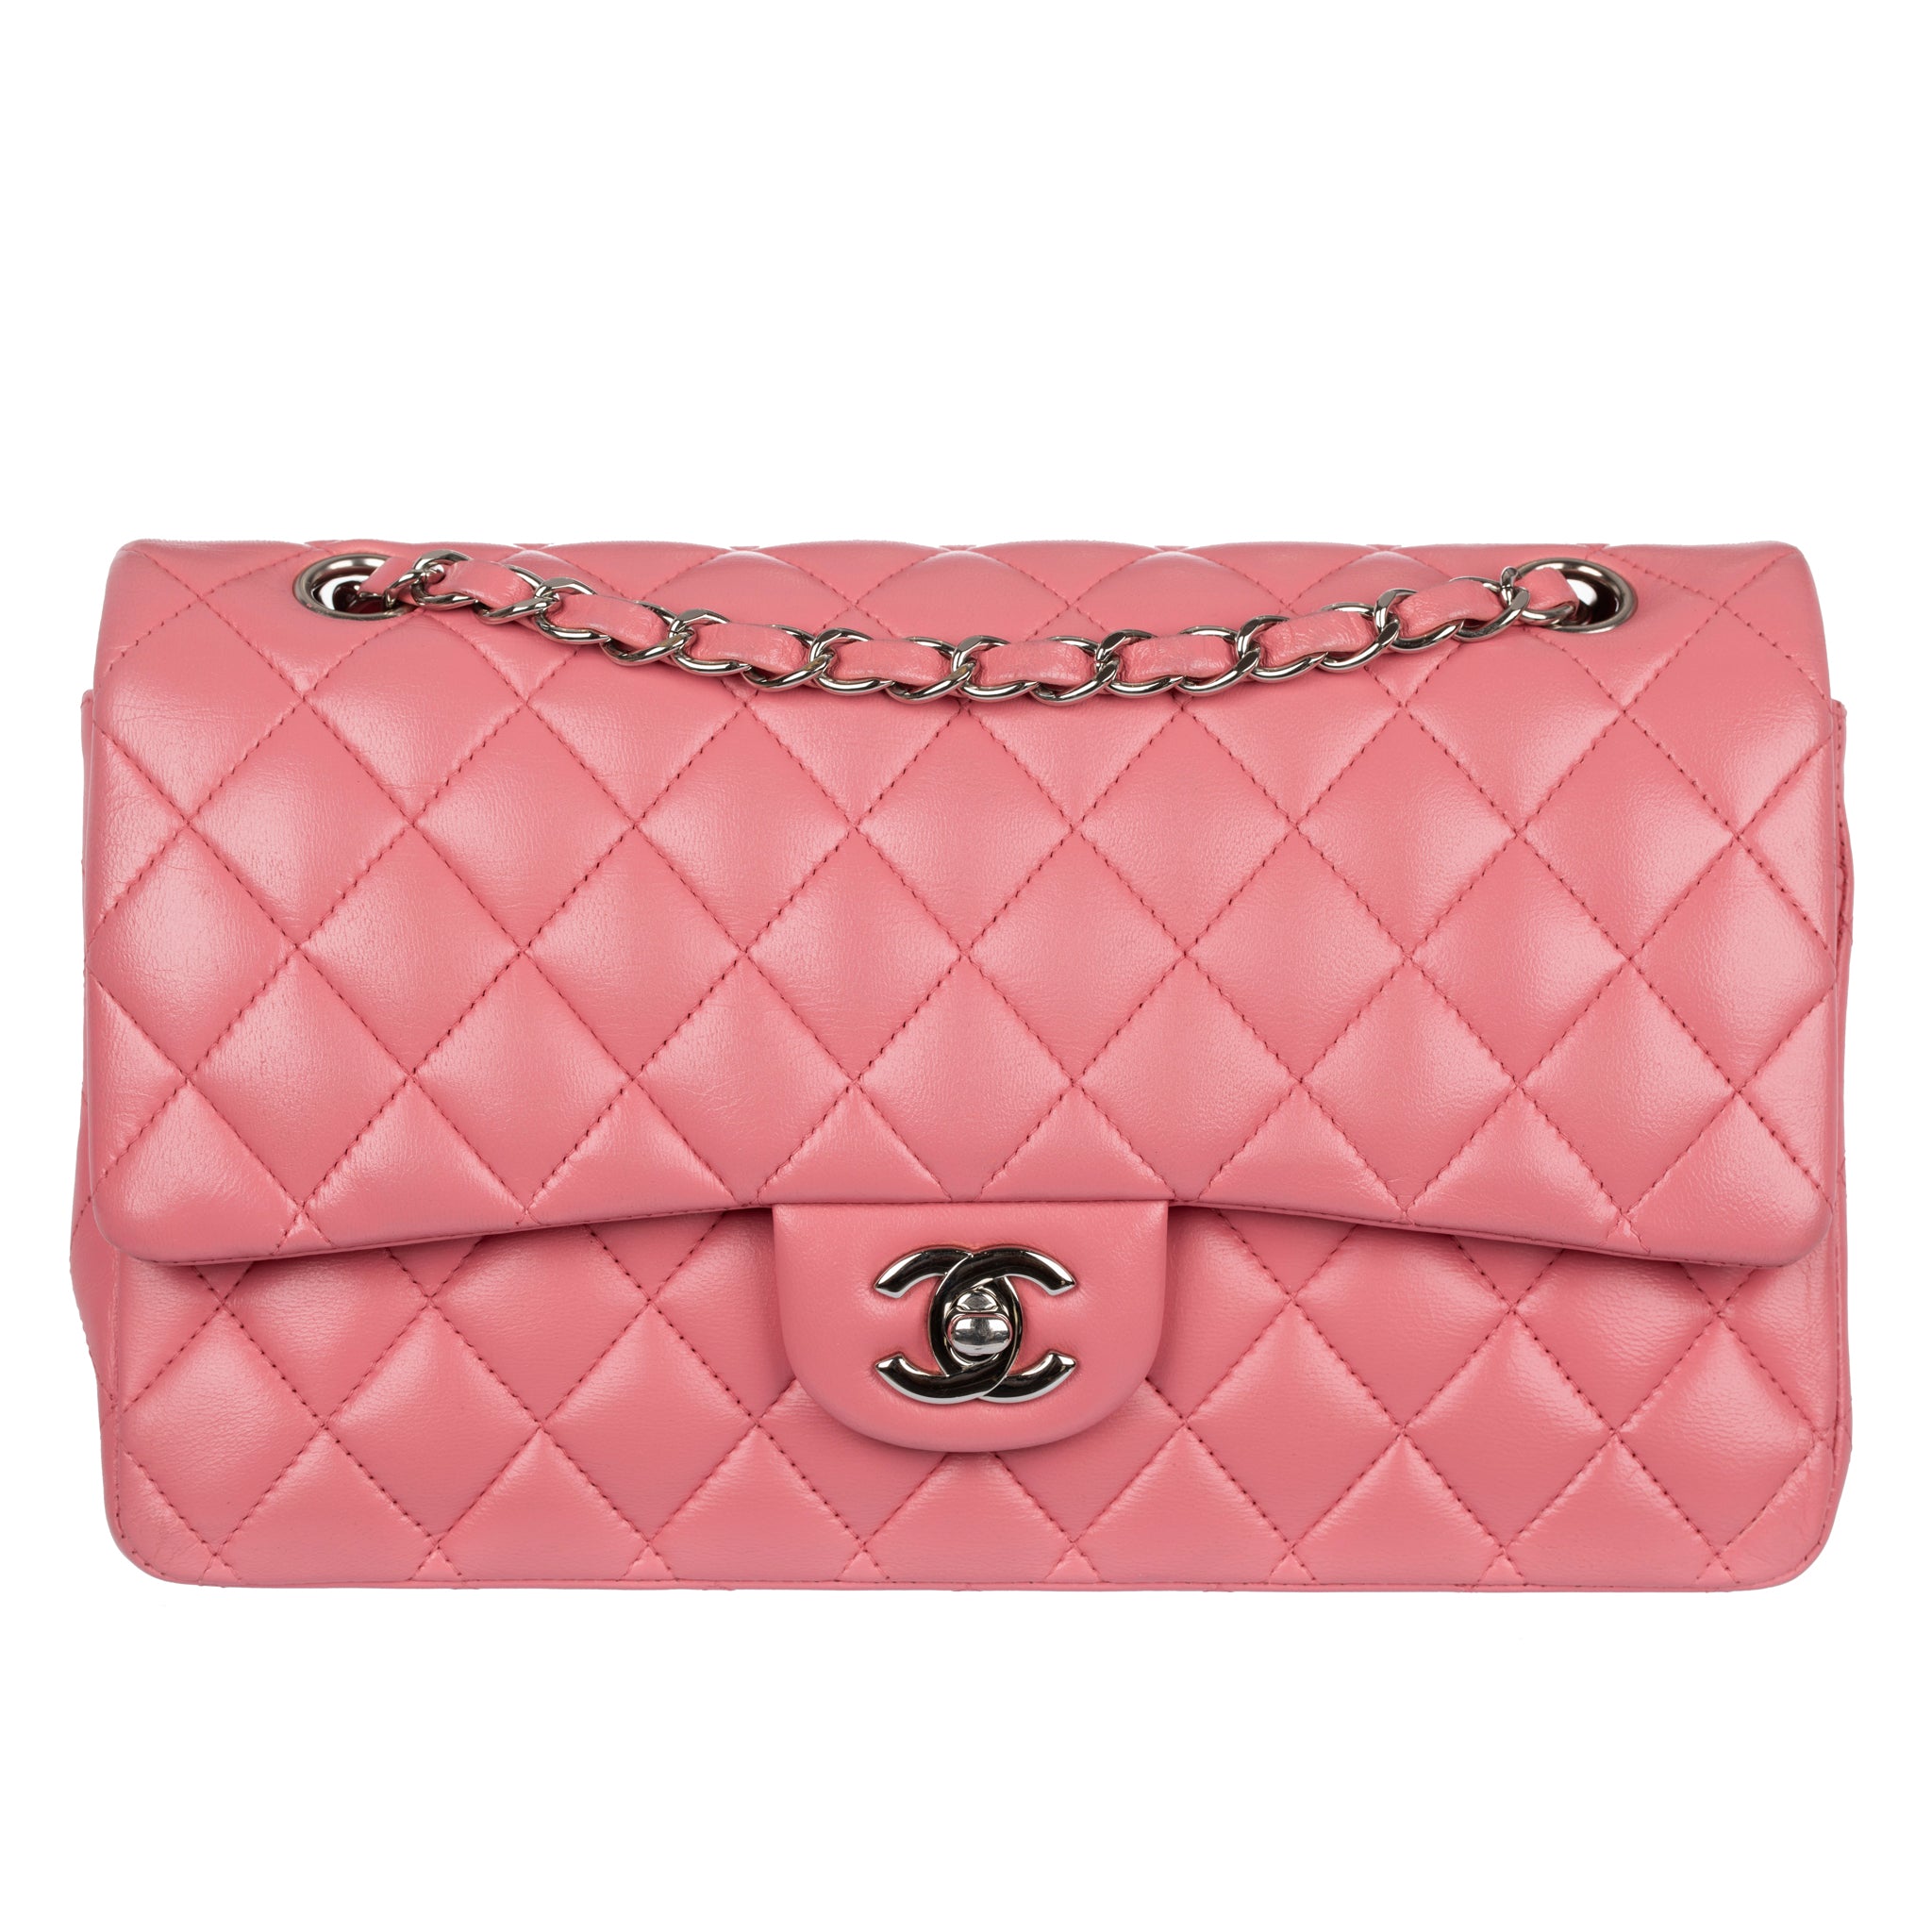 Chanel Medium Double Classic Flap Bag Pink Lambskin Leather Gold Tone Hardware